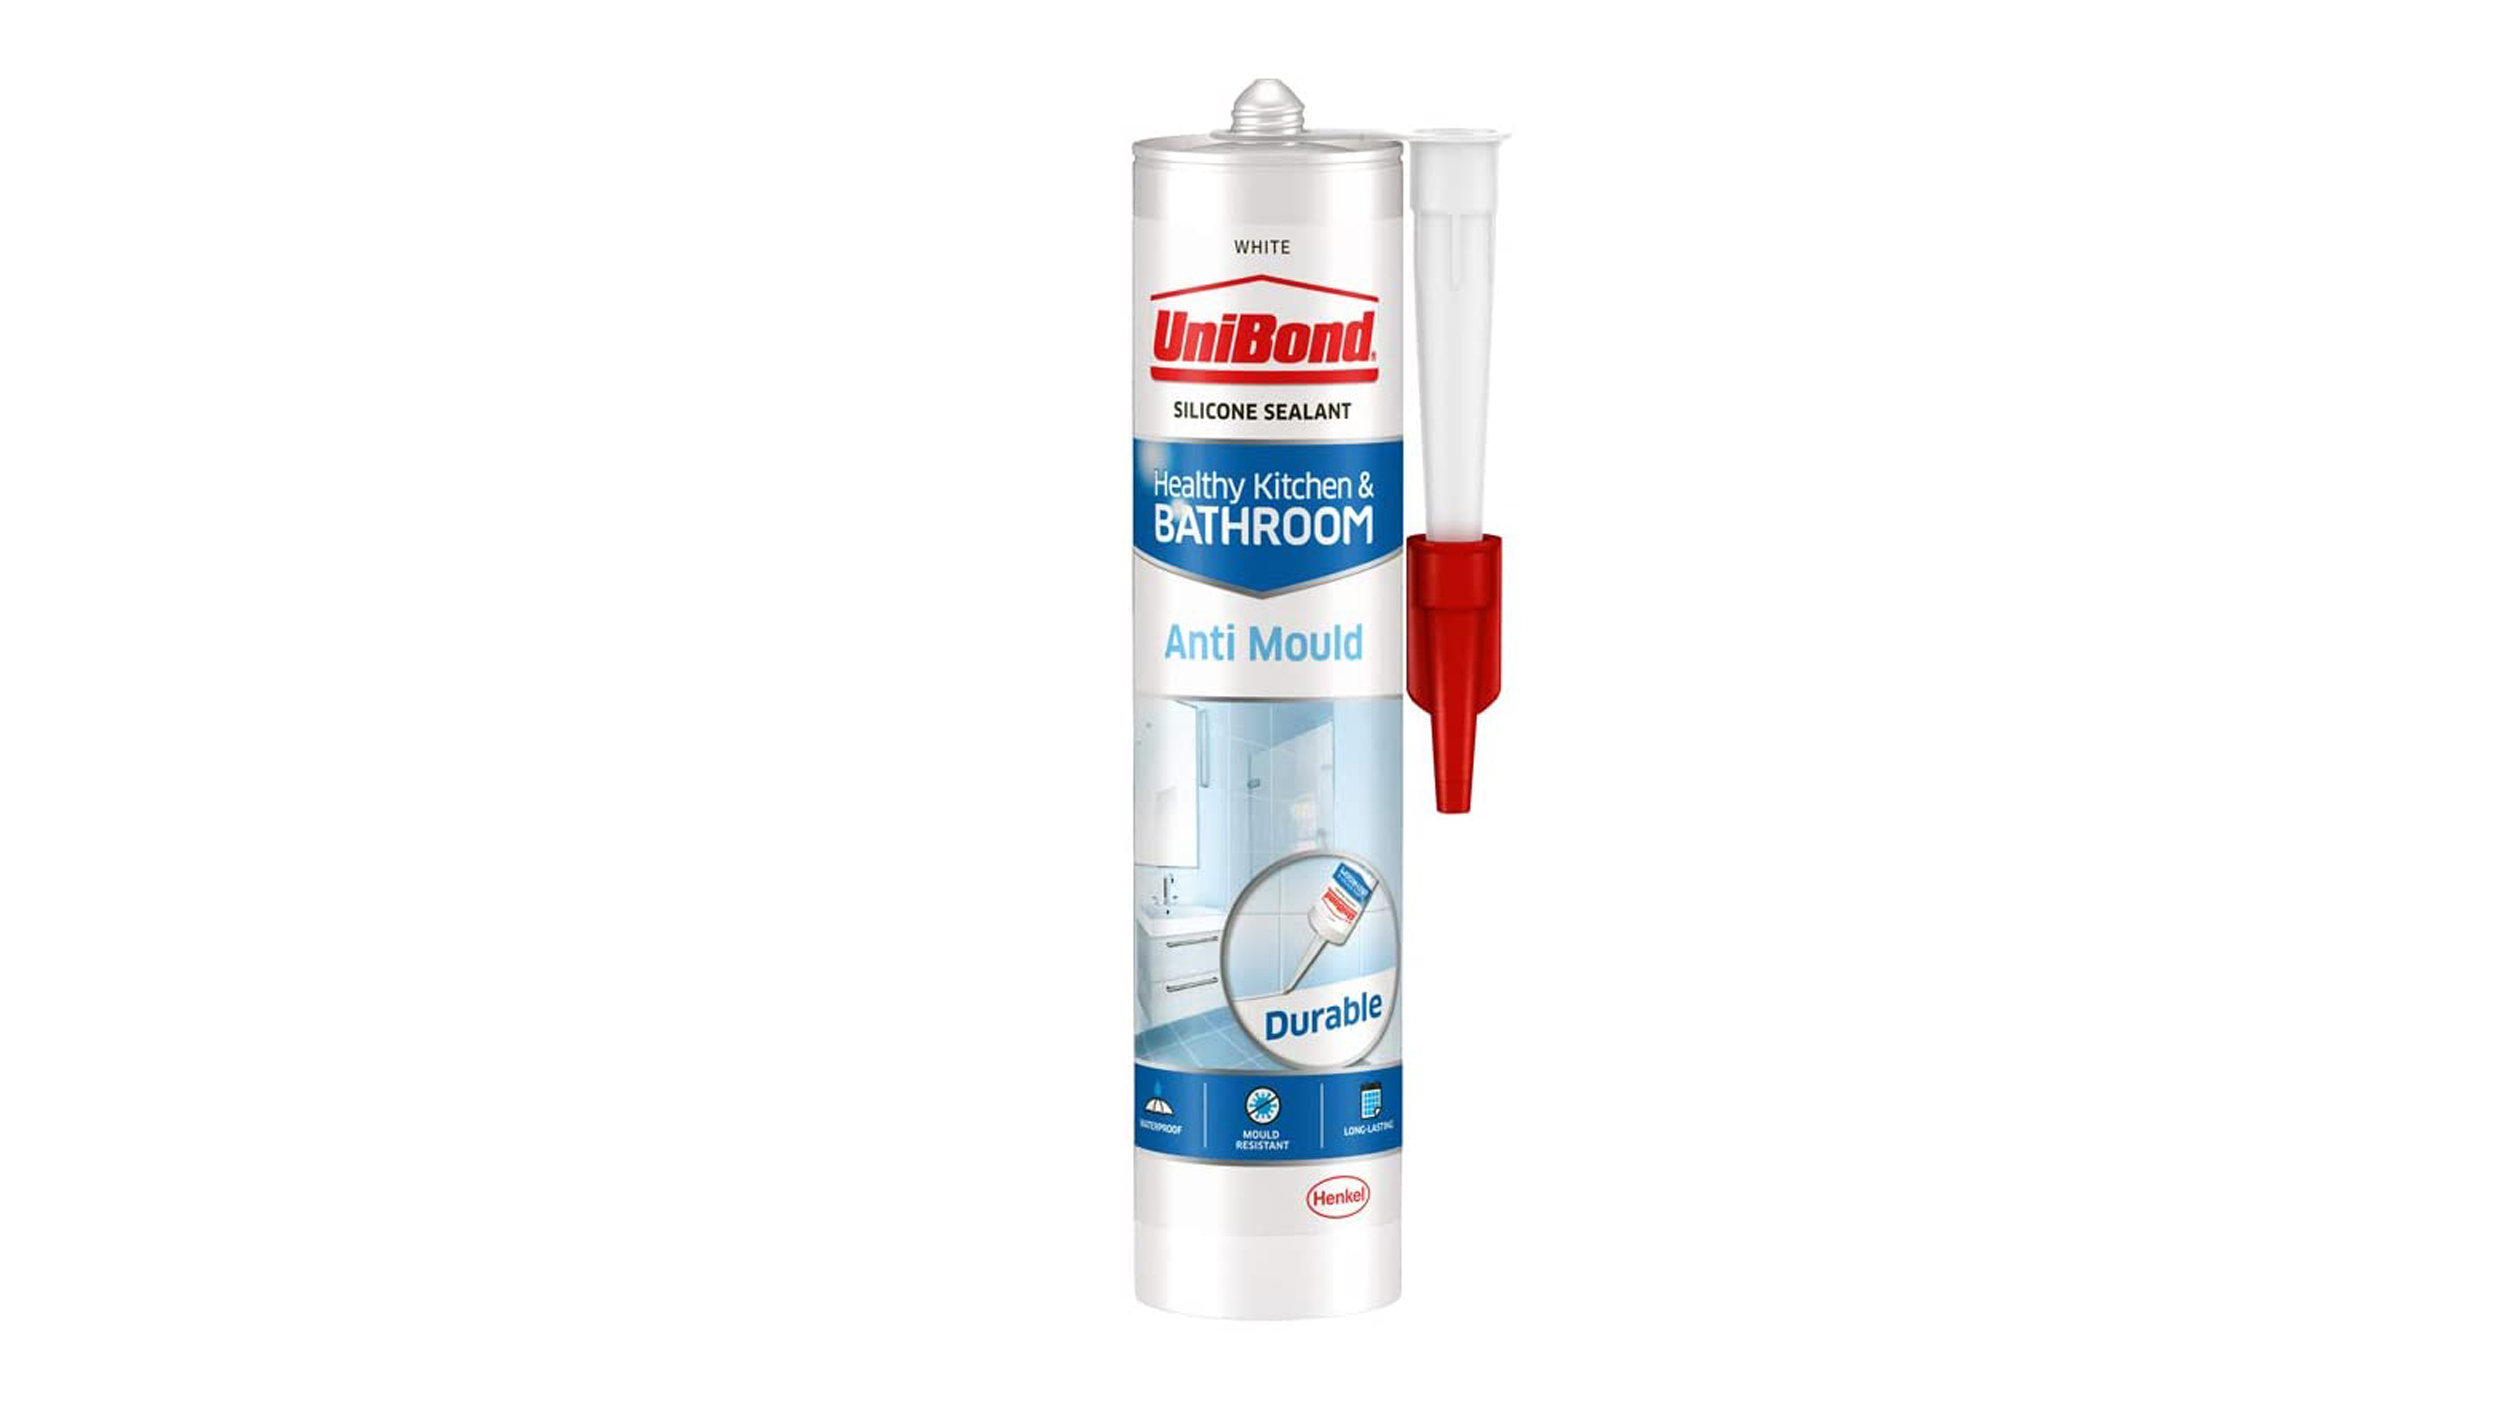 The UniBond Anti-Mould Sealant is one of the best bathroom sealants